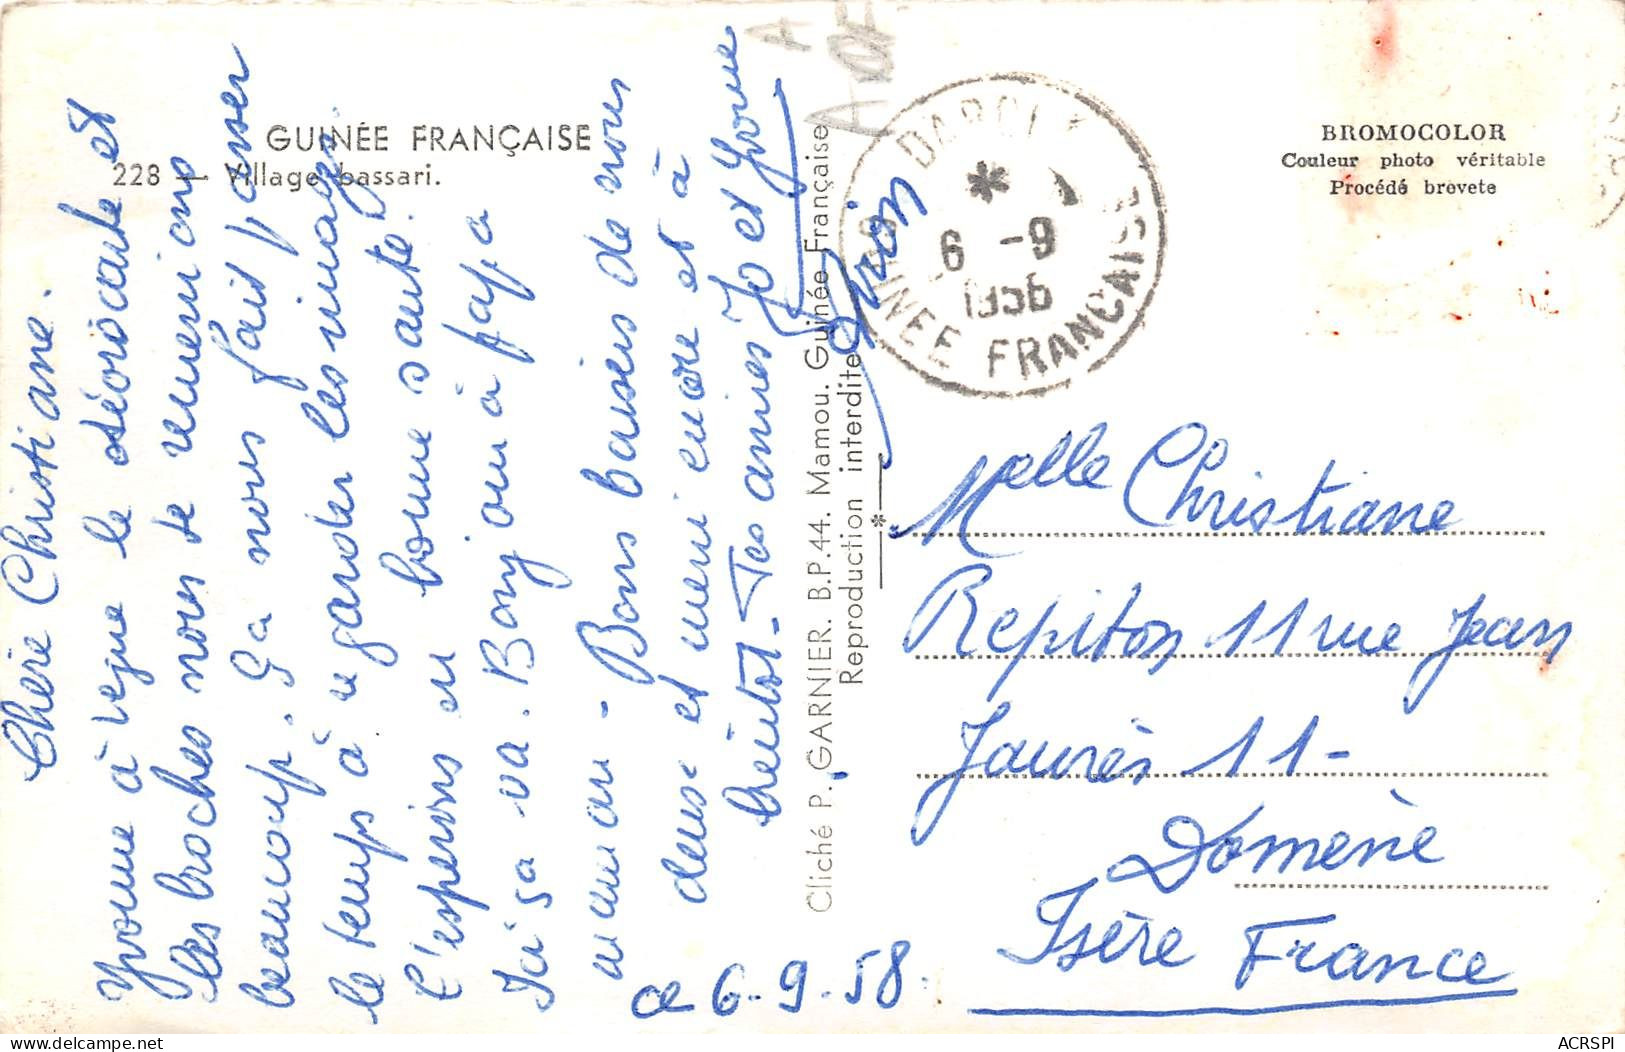 GUINEE Francaise  VILLAGE BASSARI Cases  (scan Recto-verso) OO 0951 - French Guinea